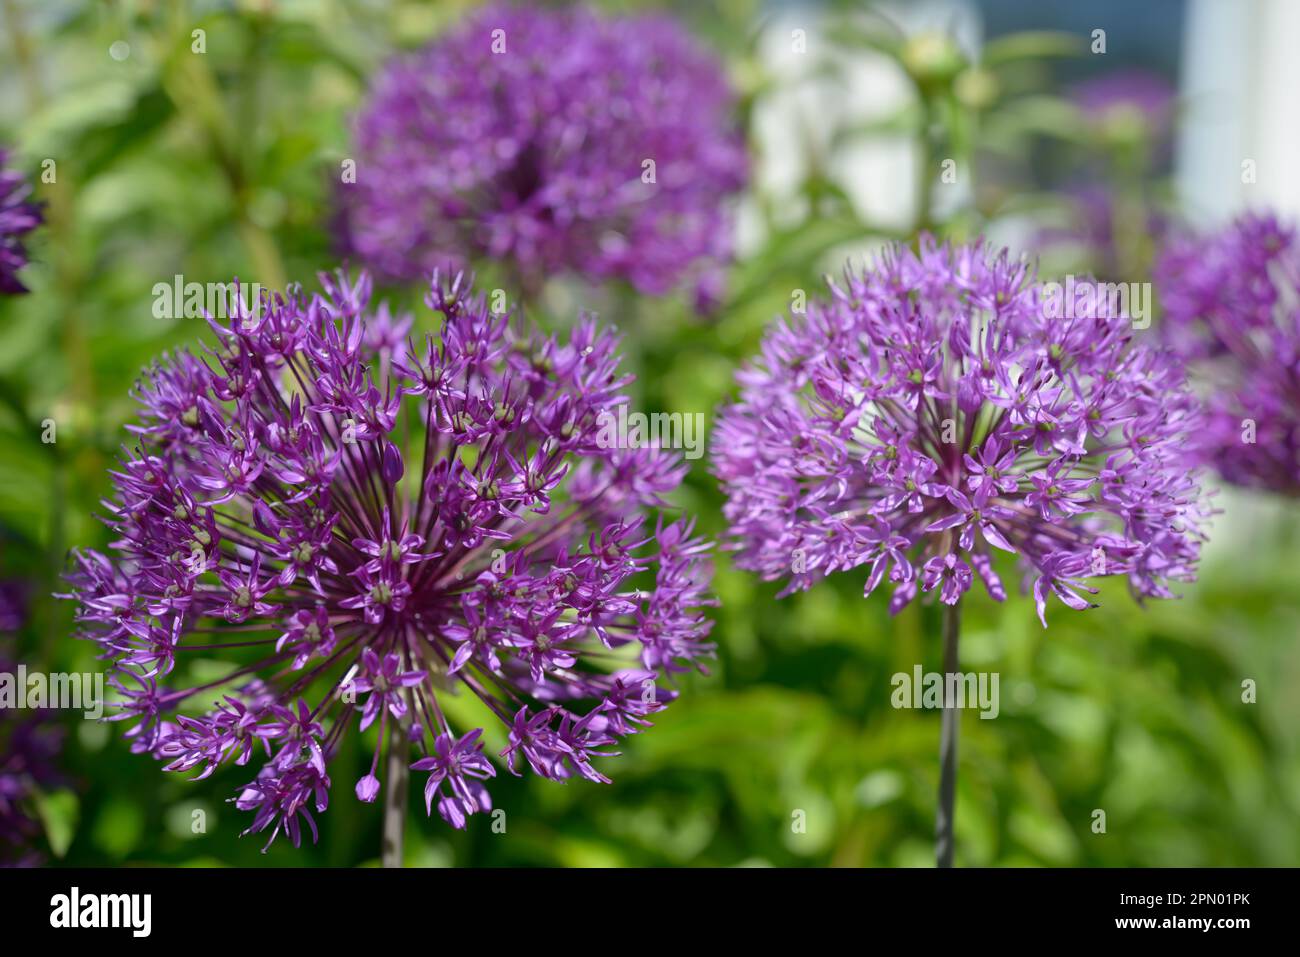 large purple cultivated allium blossoms in the garden Stock Photo